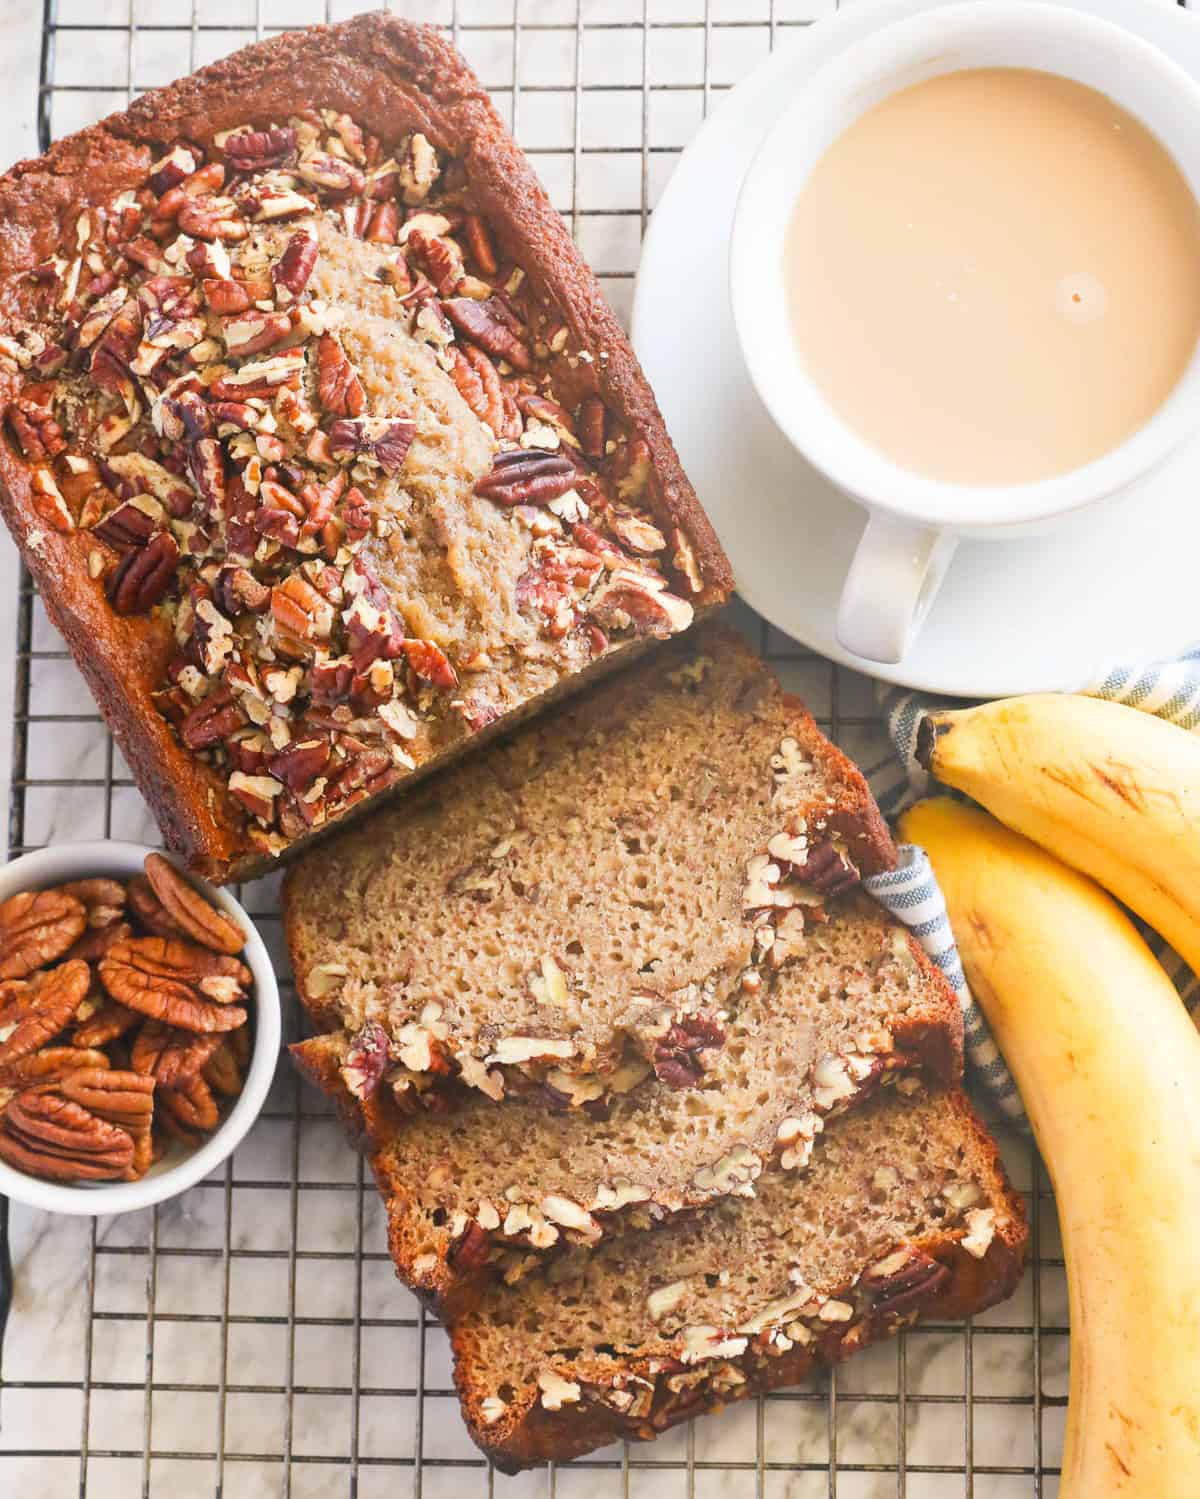 Freshly baked banana nut bread sliced ​​and ready to serve with coffee